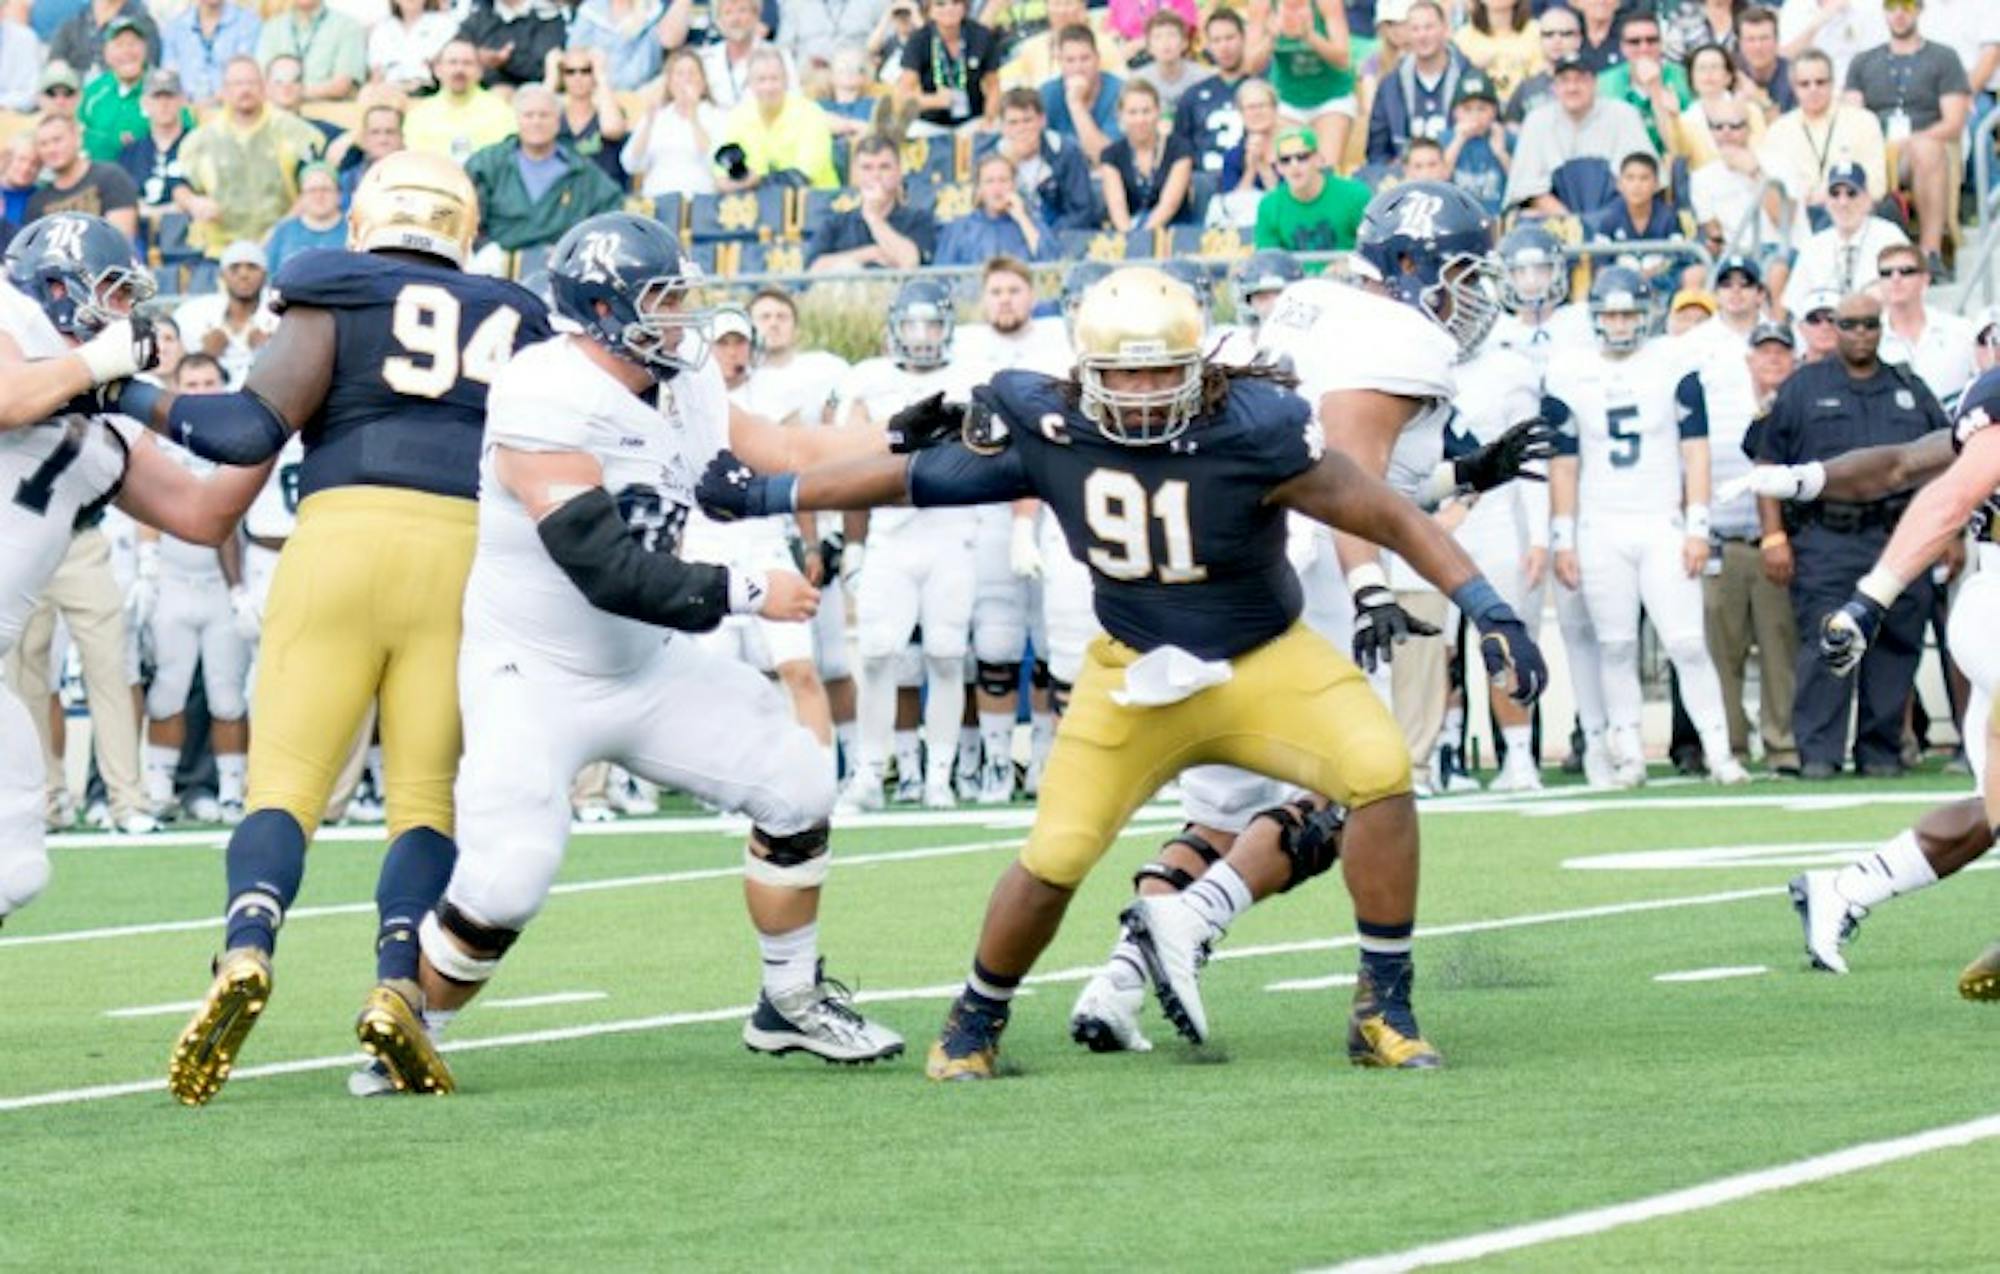 Irish senior defensive end and captain Sheldon Day works past his blocker in an attempt to get to the ball carrier during Notre Dame’s 48-17 victory over Rice on Saturday.